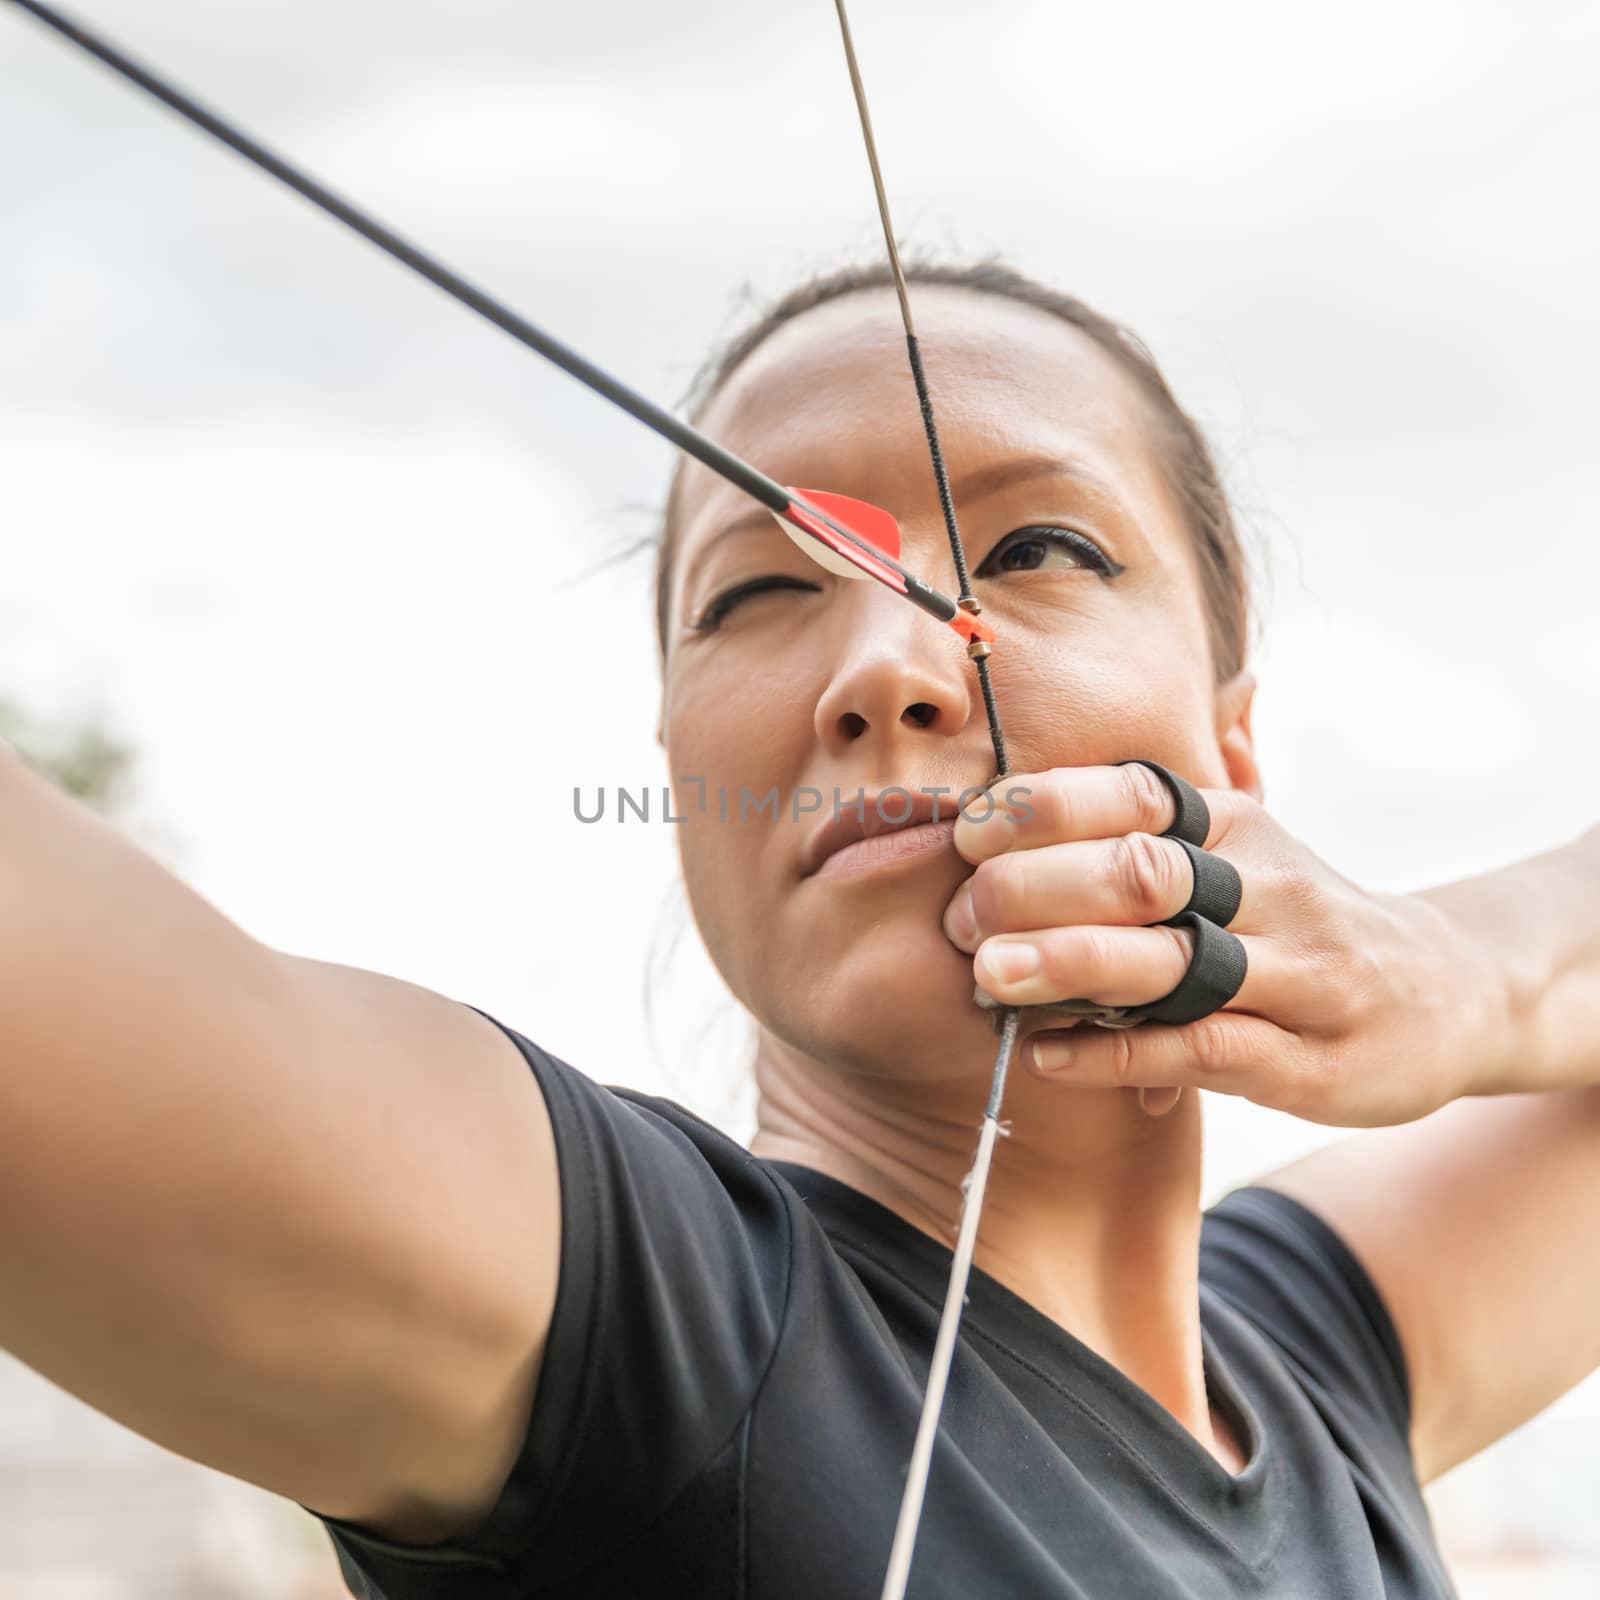 attractive woman on archery, focuses eye target for arrow from bow.